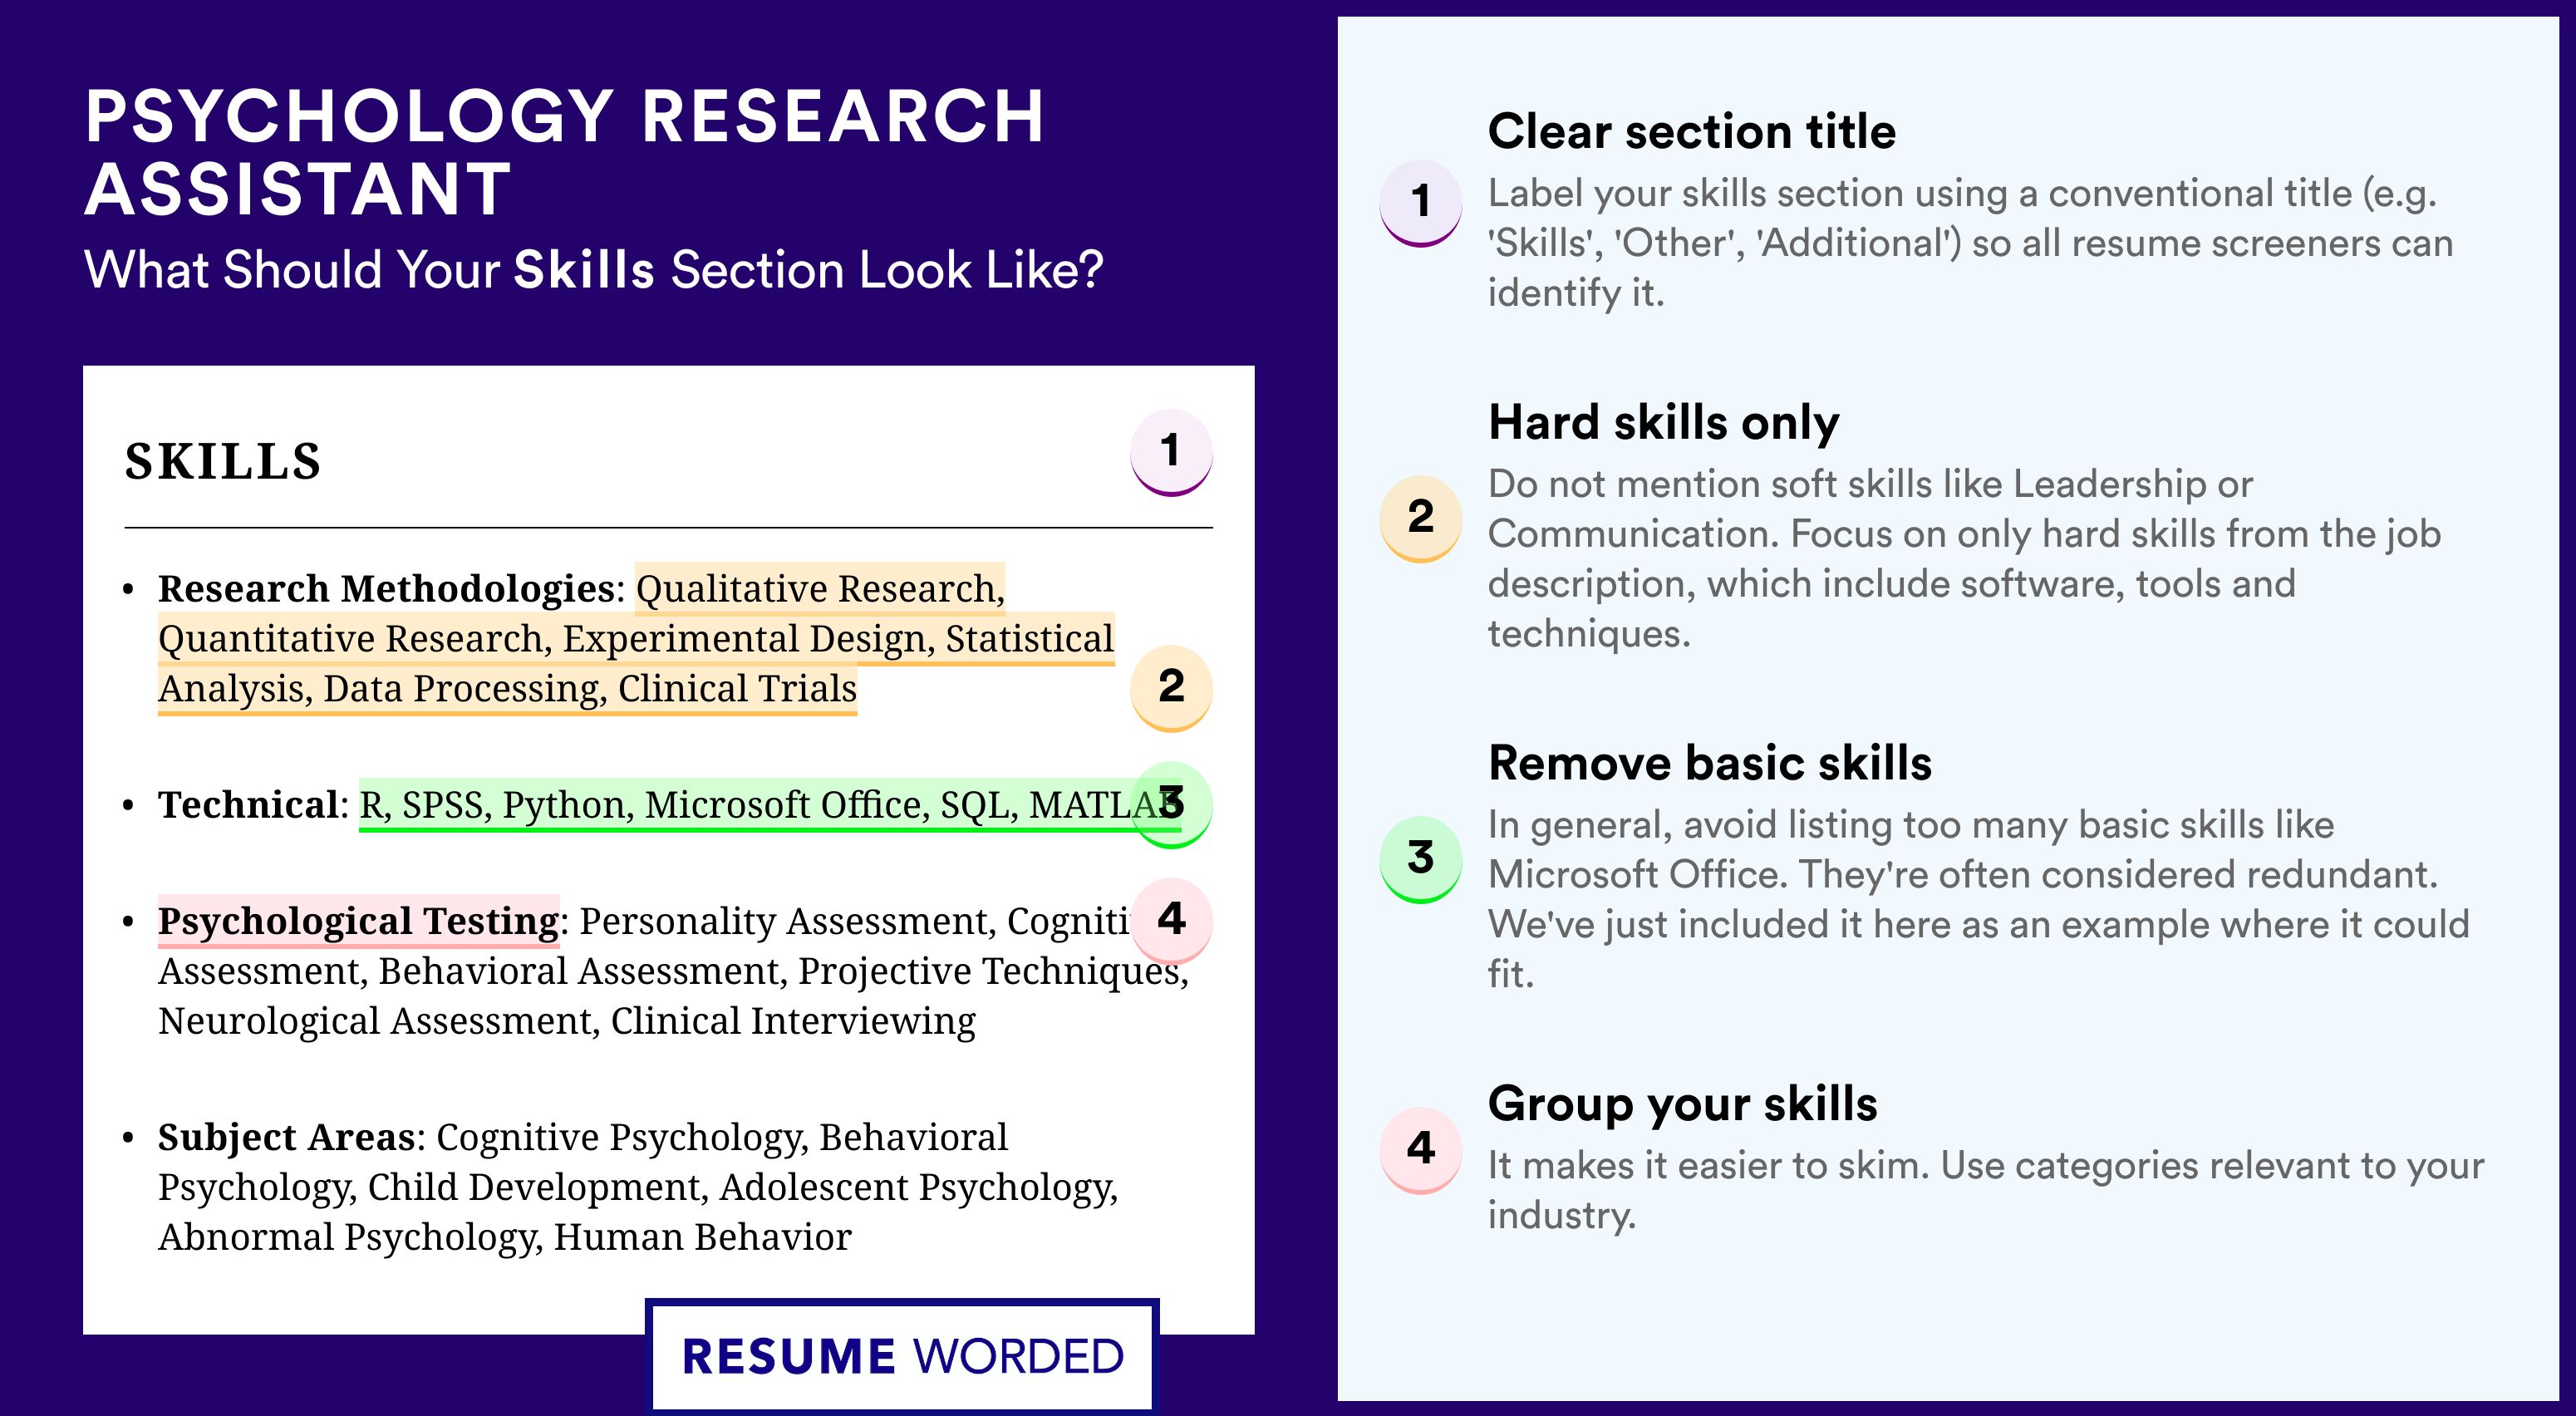 How To Write Your Skills Section - Psychology Research Assistant Roles